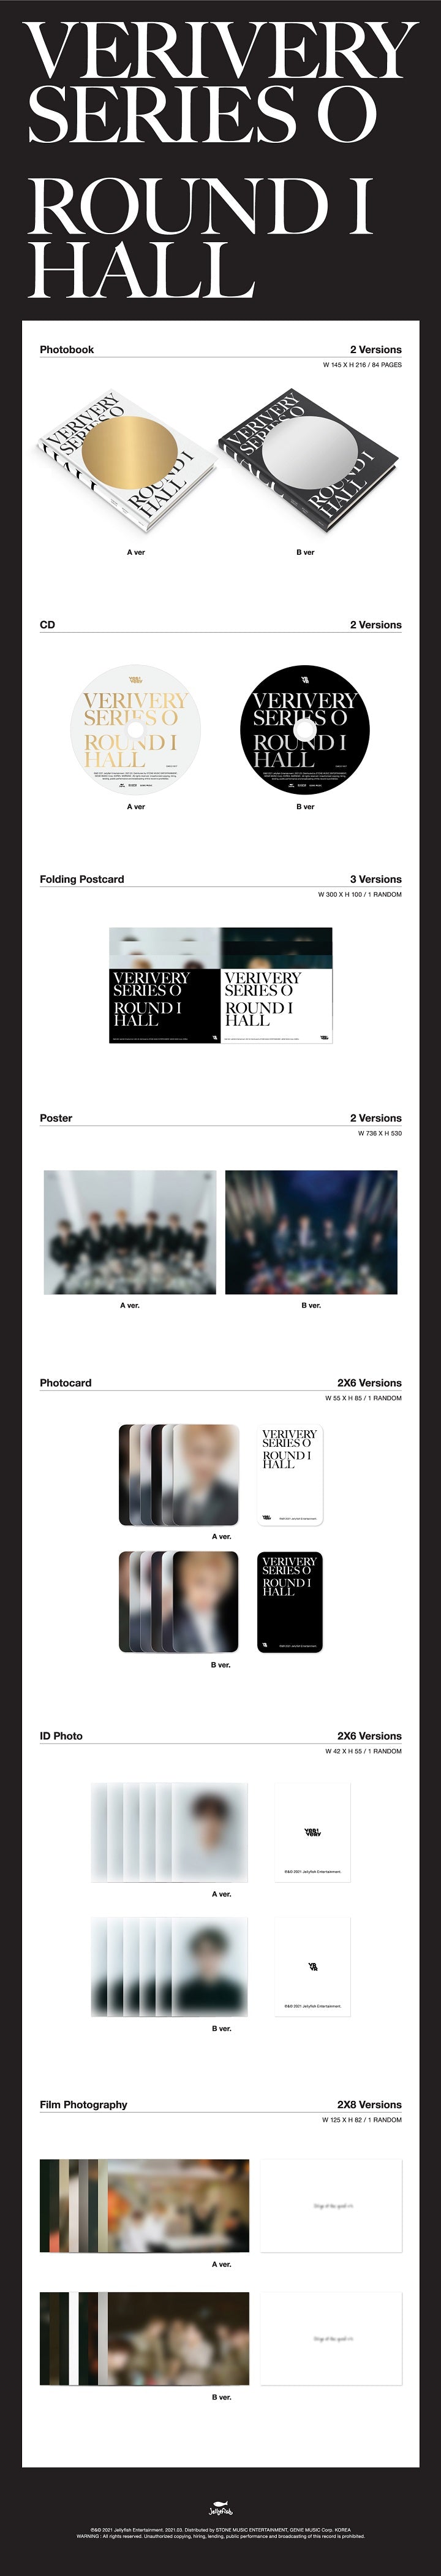 1 CD
1 Photo Book (84 pages)
1 Post
1 Photo Card
1 ID Photo
1 Film Photography